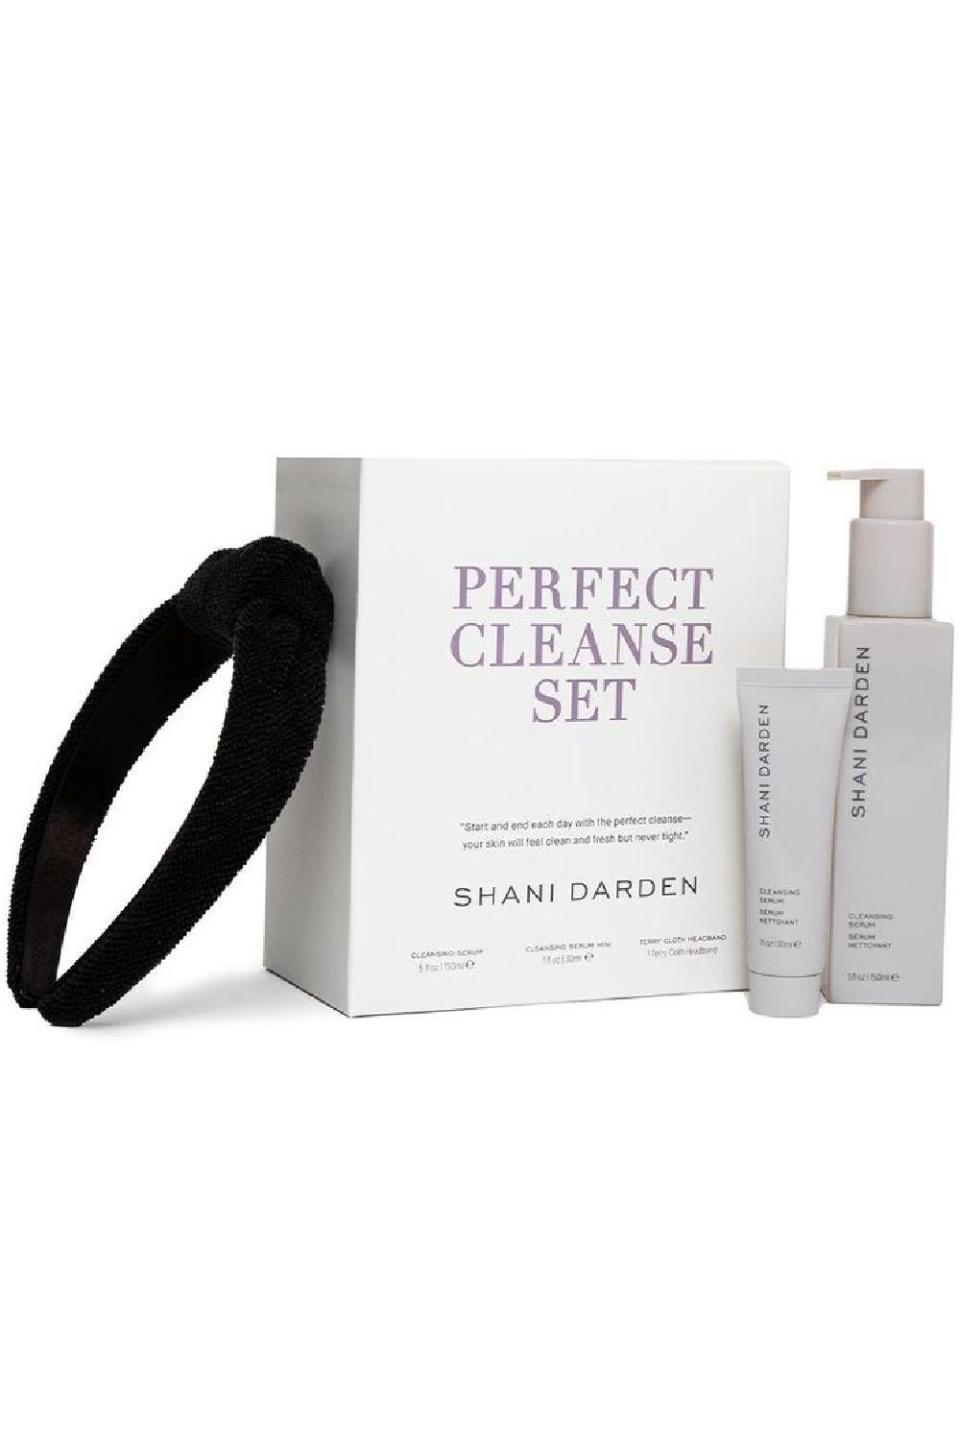 11) Shani Darden Skin Care Perfect Cleanse Set